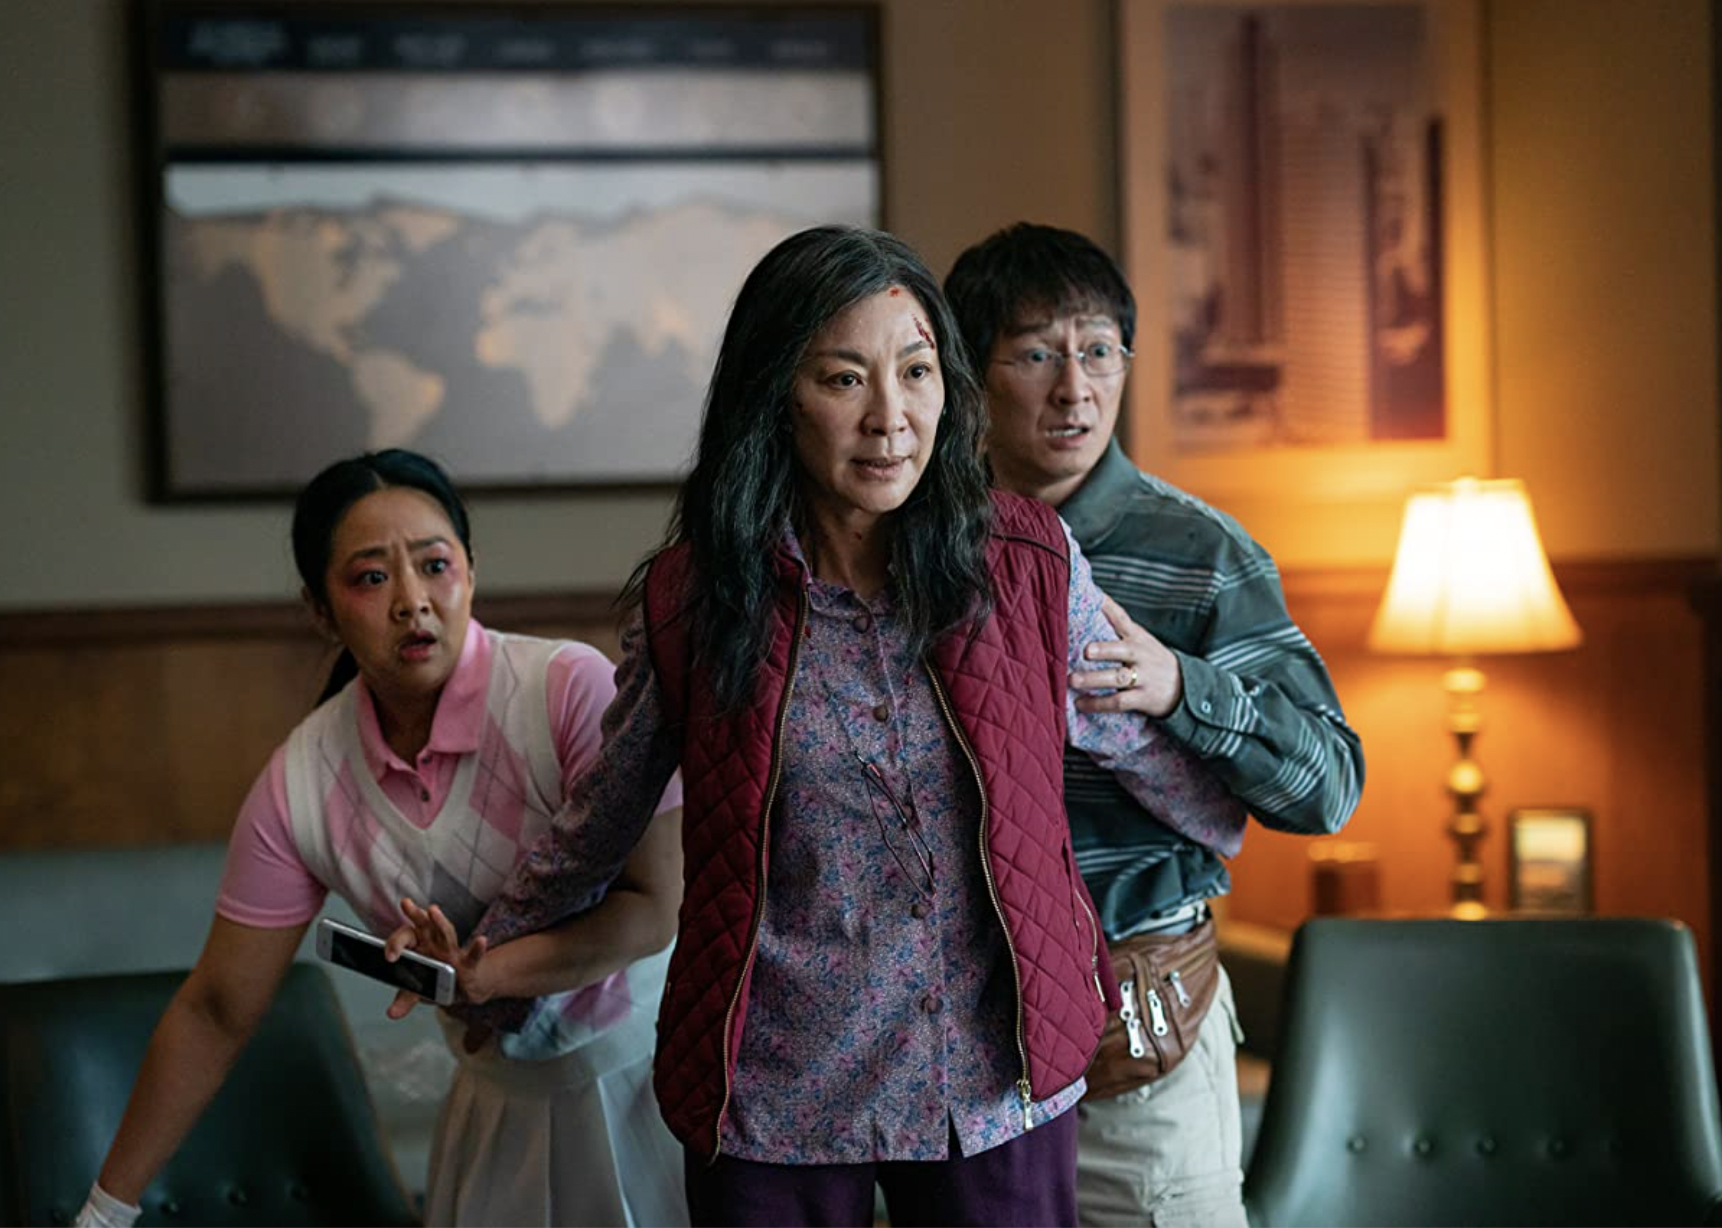 Michelle Yeoh, Ke Huy Quan, and Stephanie Hsu in "Everything Everywhere All at Once."